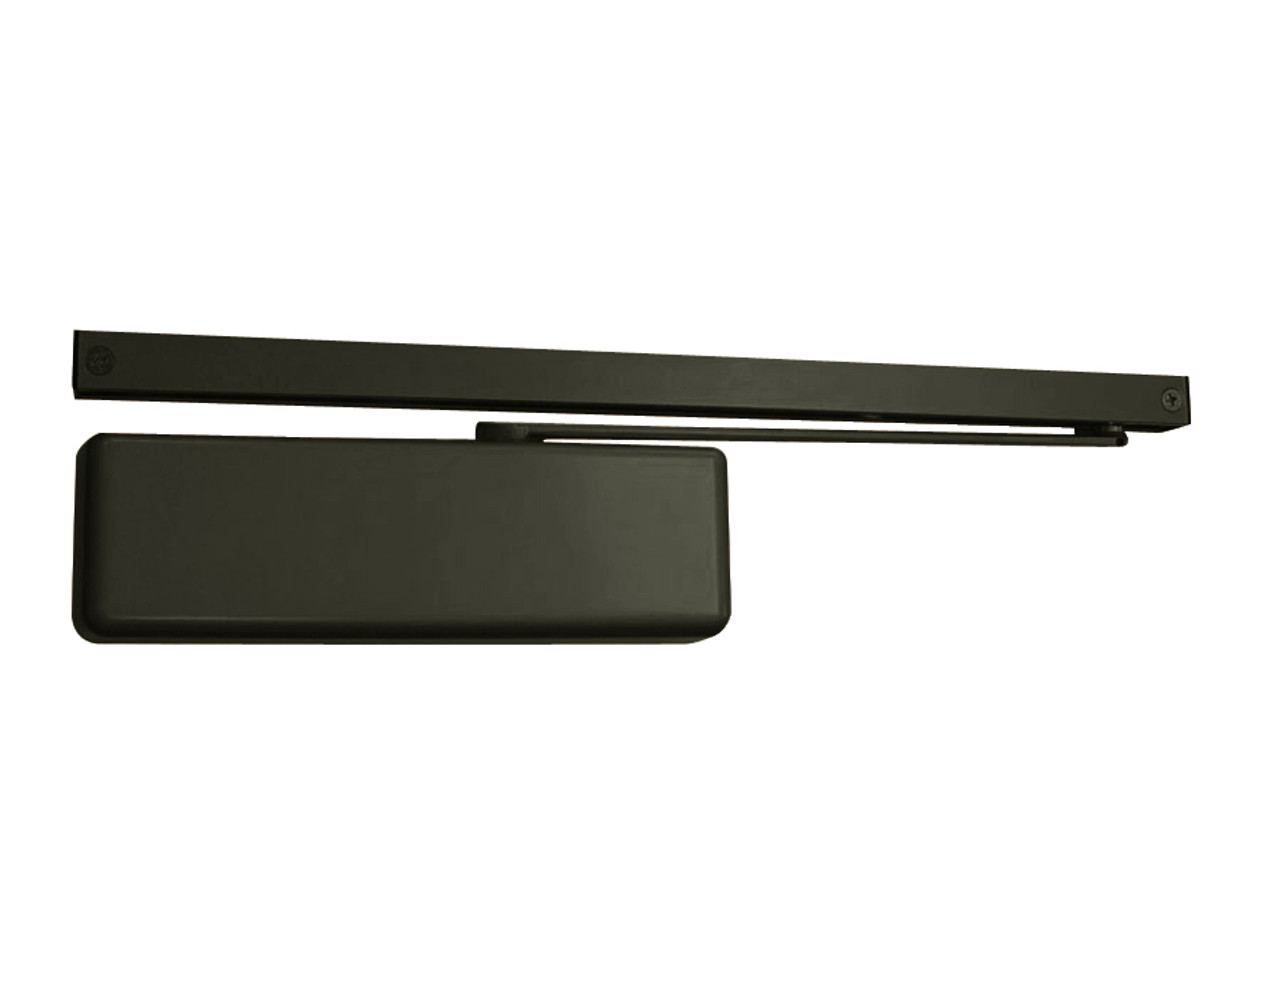 4014T-H-BUMPER-LH-US10B LCN Door Closer Hold Open Track with Bumper in Oil Rubbed Bronze Finish